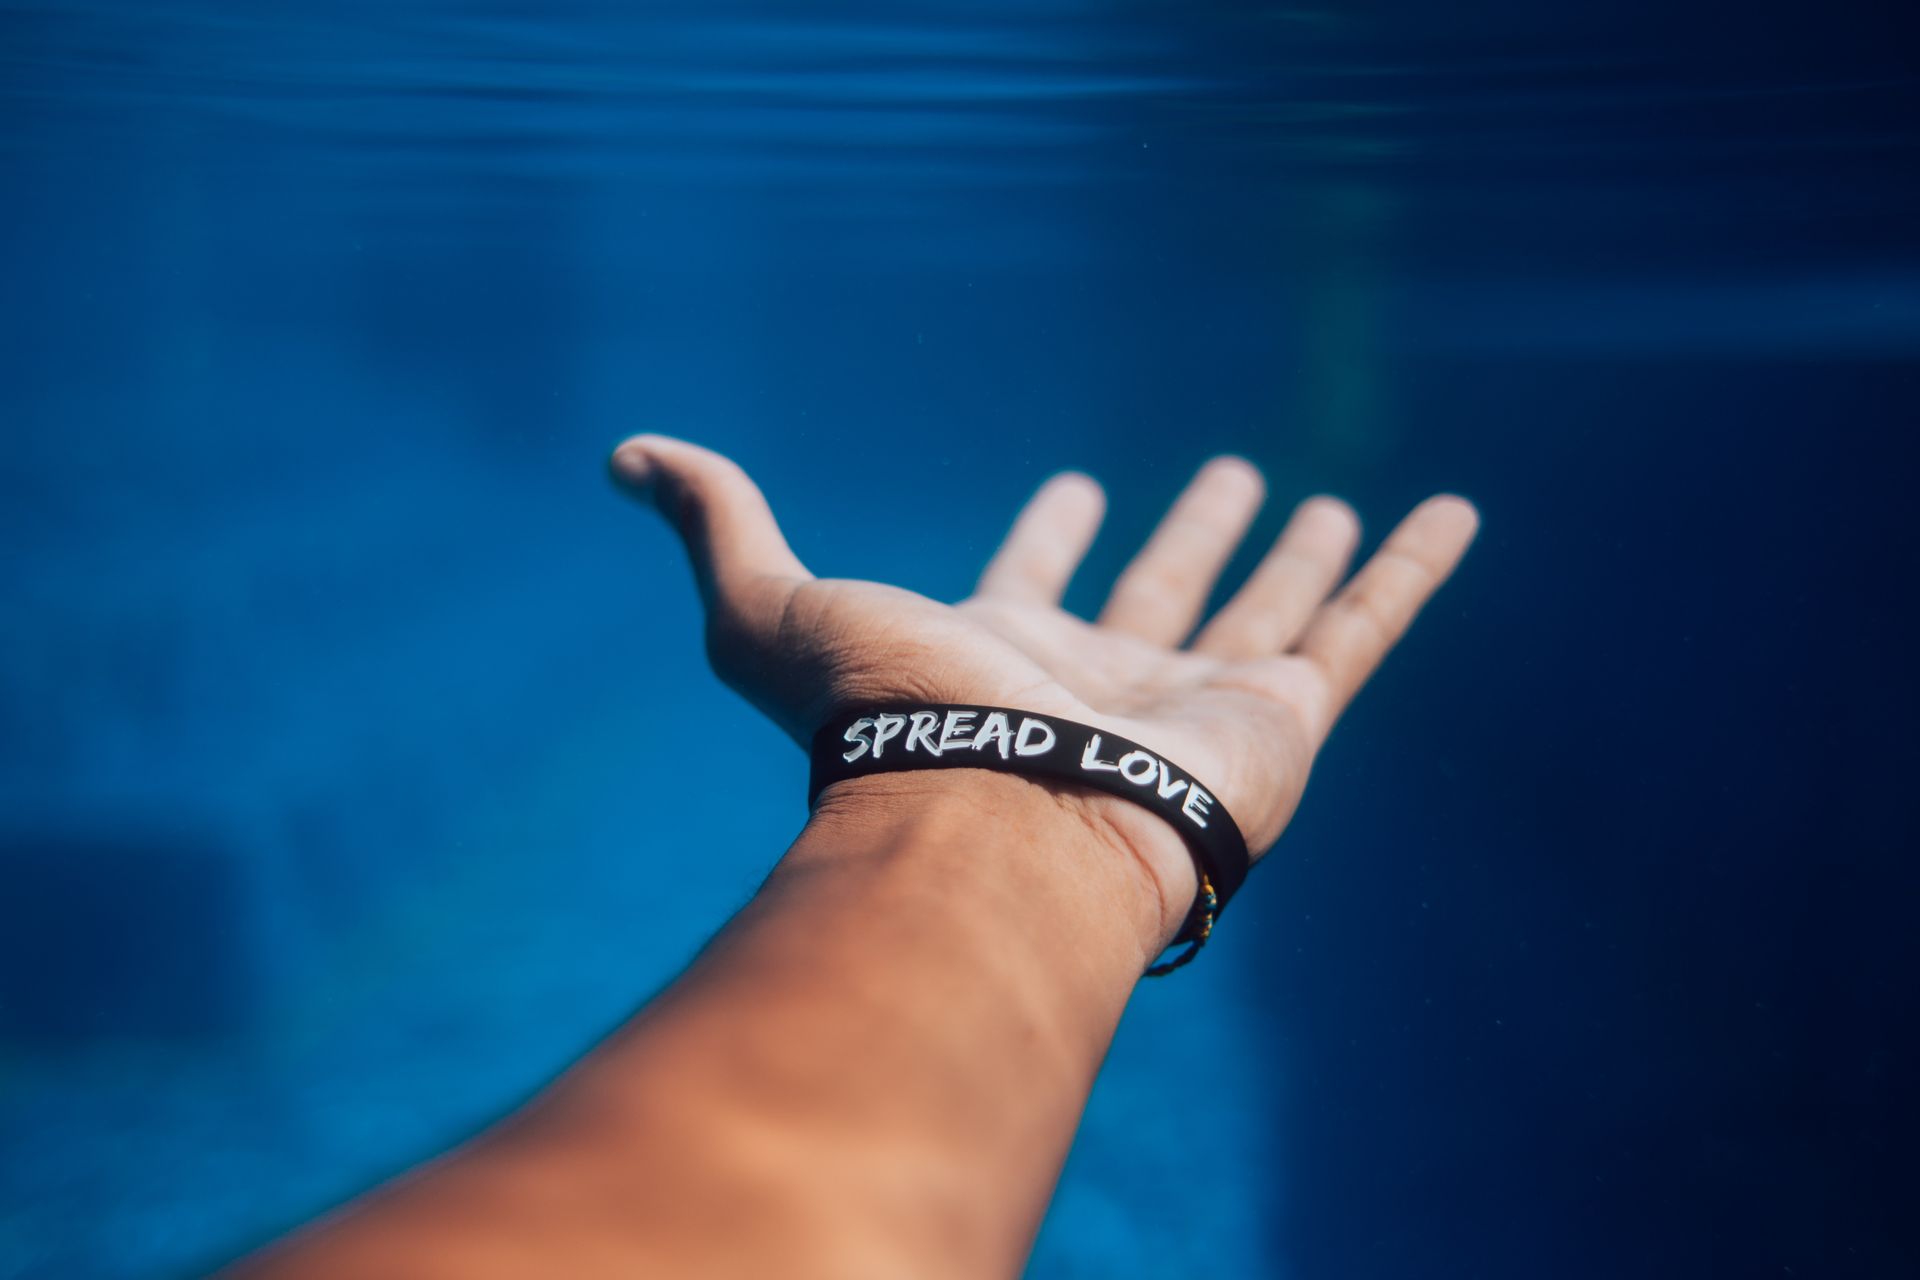 Hand reaching out with wrist band that says spread love